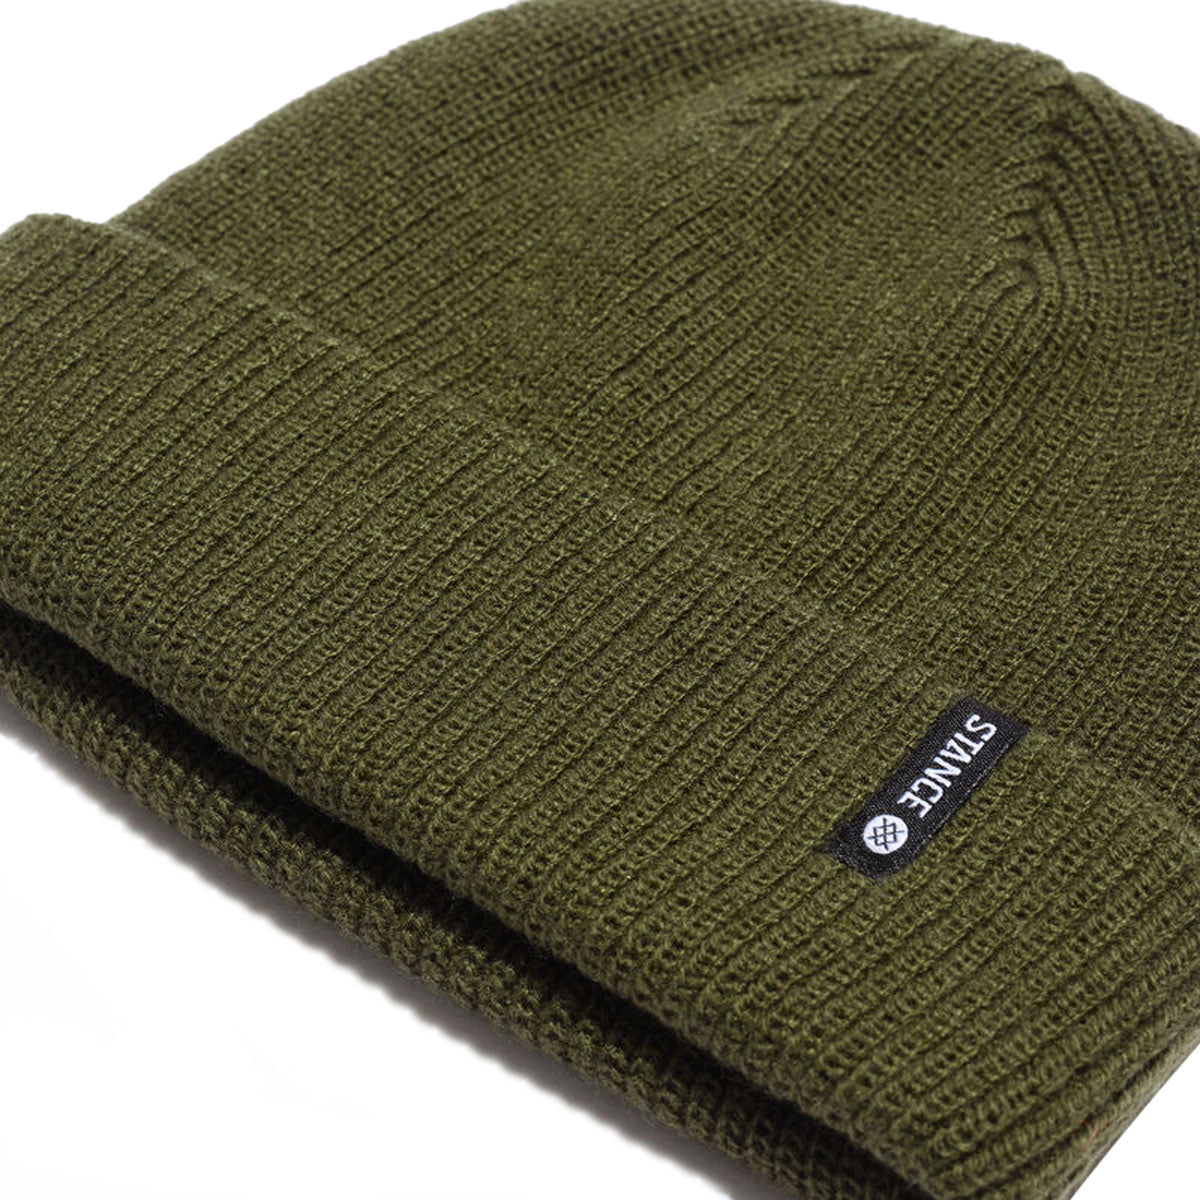 Stance Icon 2 Beanie - Olive image 2